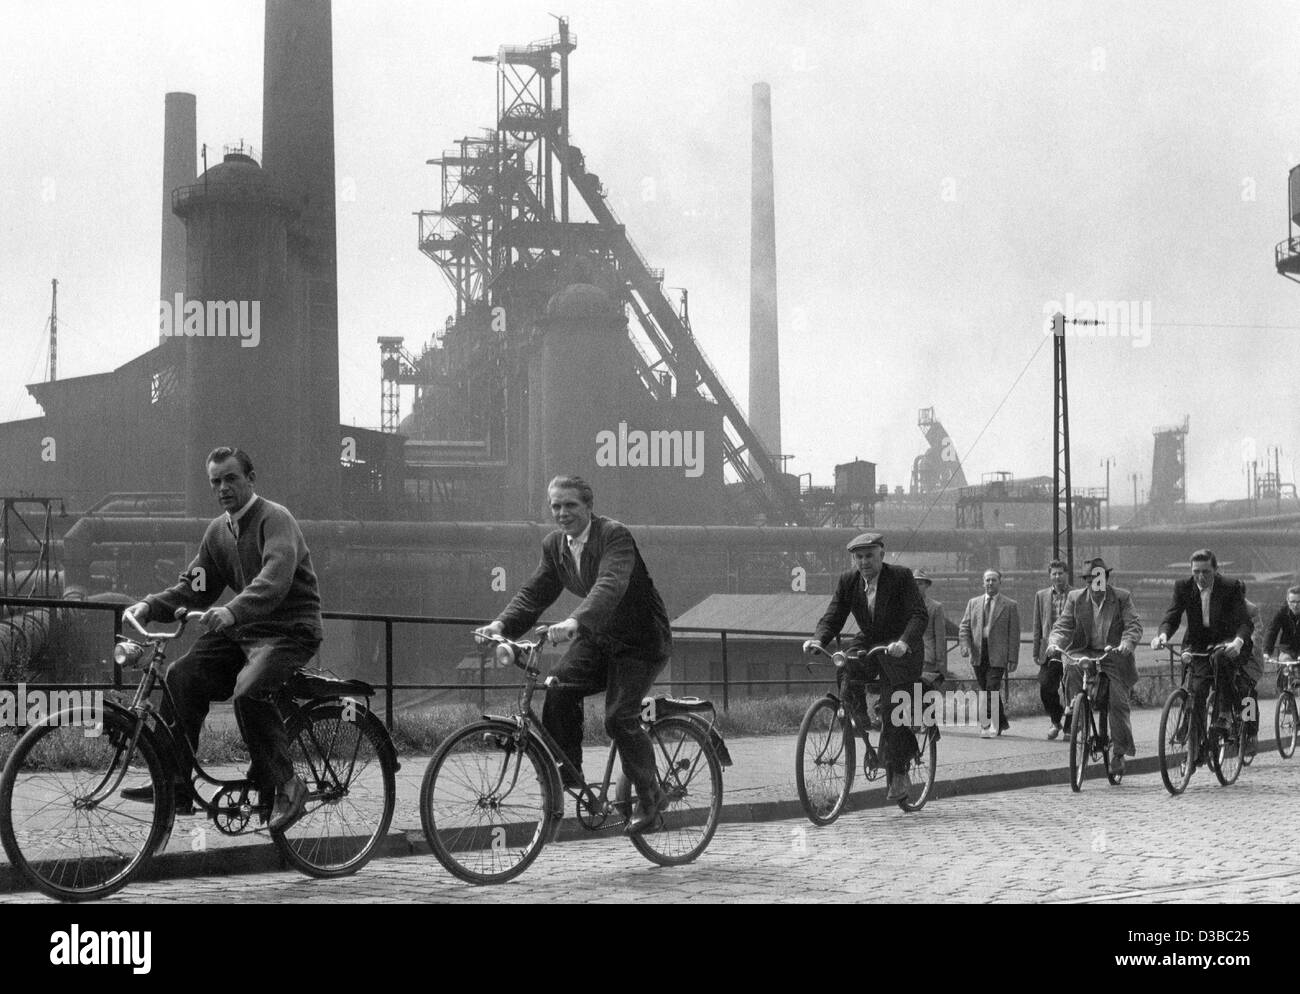 (dpa files) - After the shift changeover workers on their bikes pass the smelting works in Oberhausen, West Germany, 1957. Stock Photo